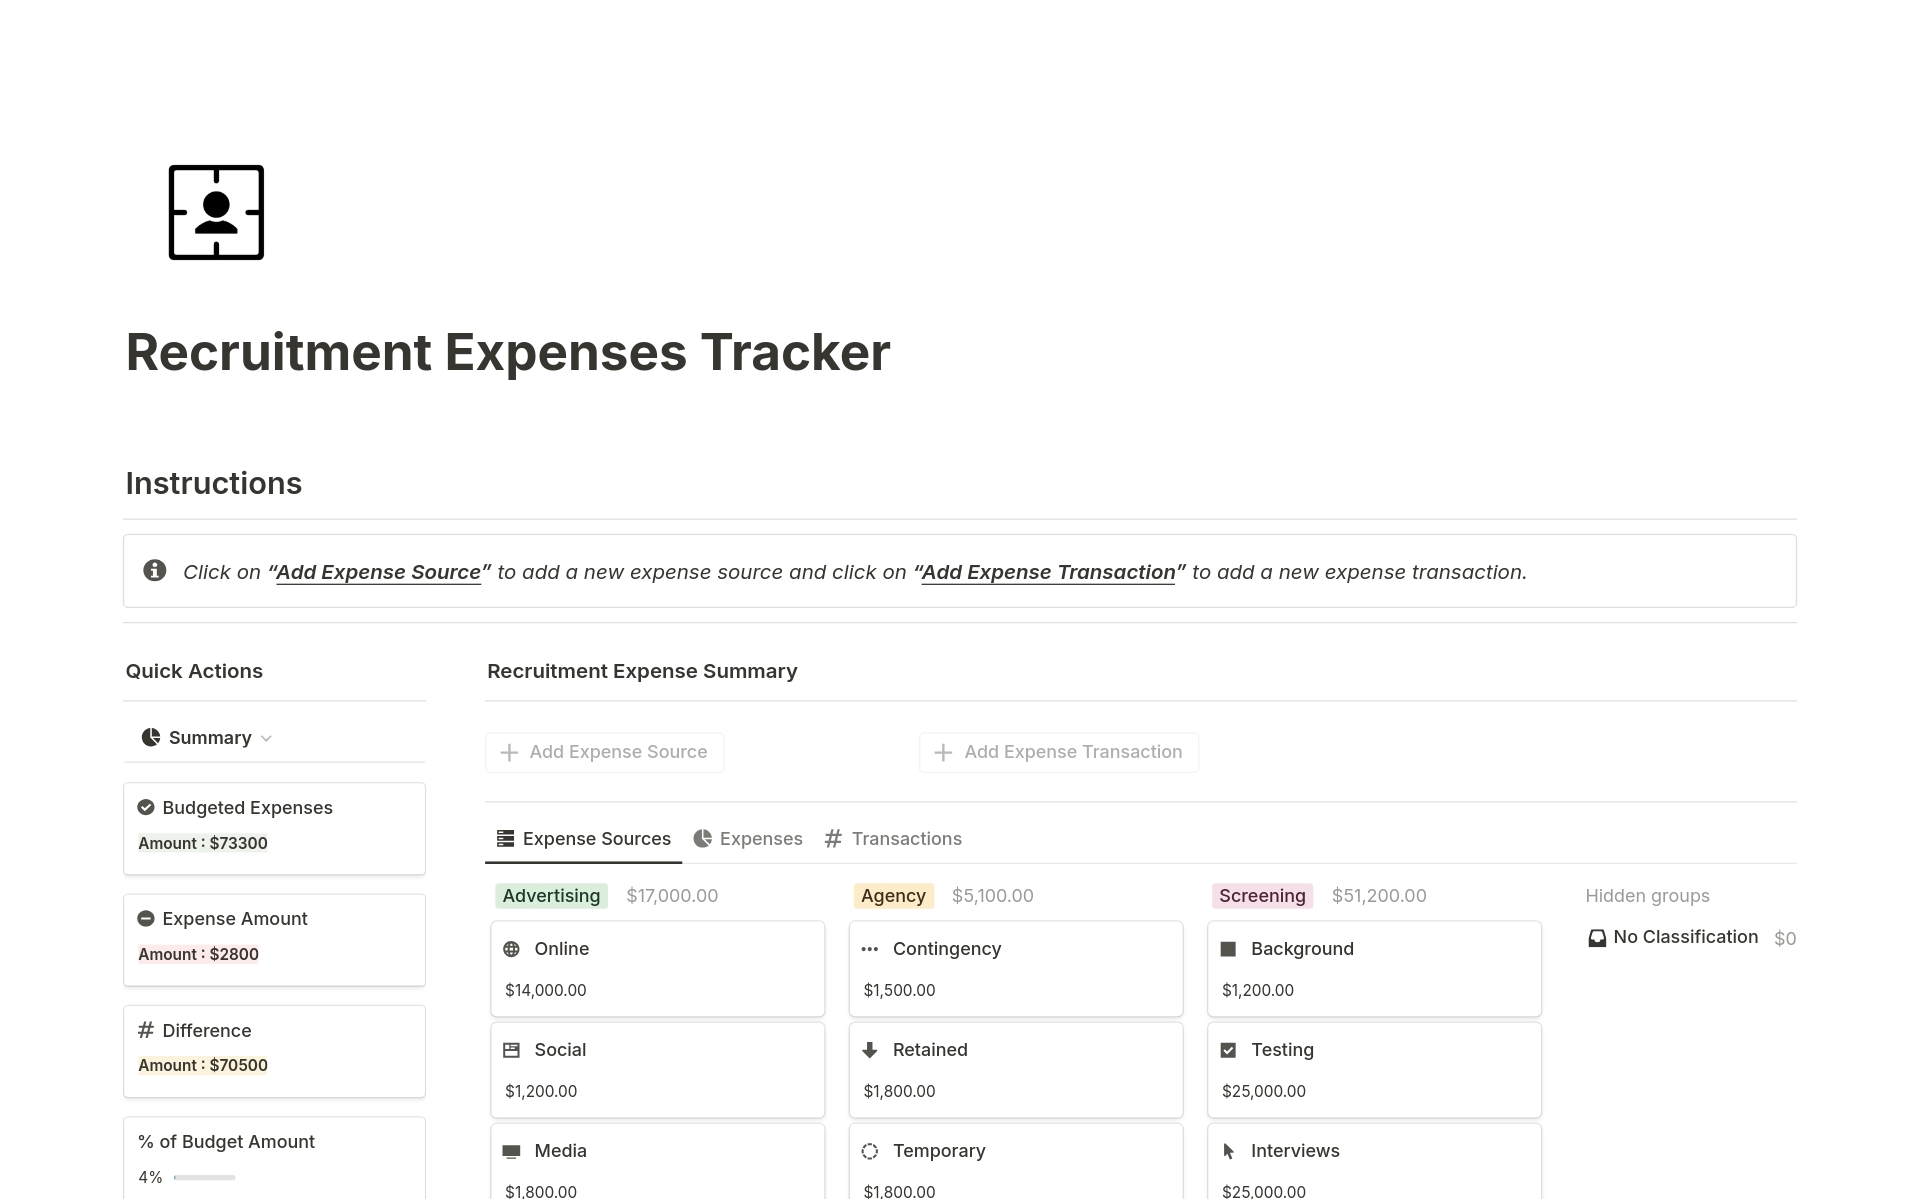 Ideal for those who manage a business, this tracker helps you keep tabs on recruitment-related expenses such as advertising, agency, screening and much more.